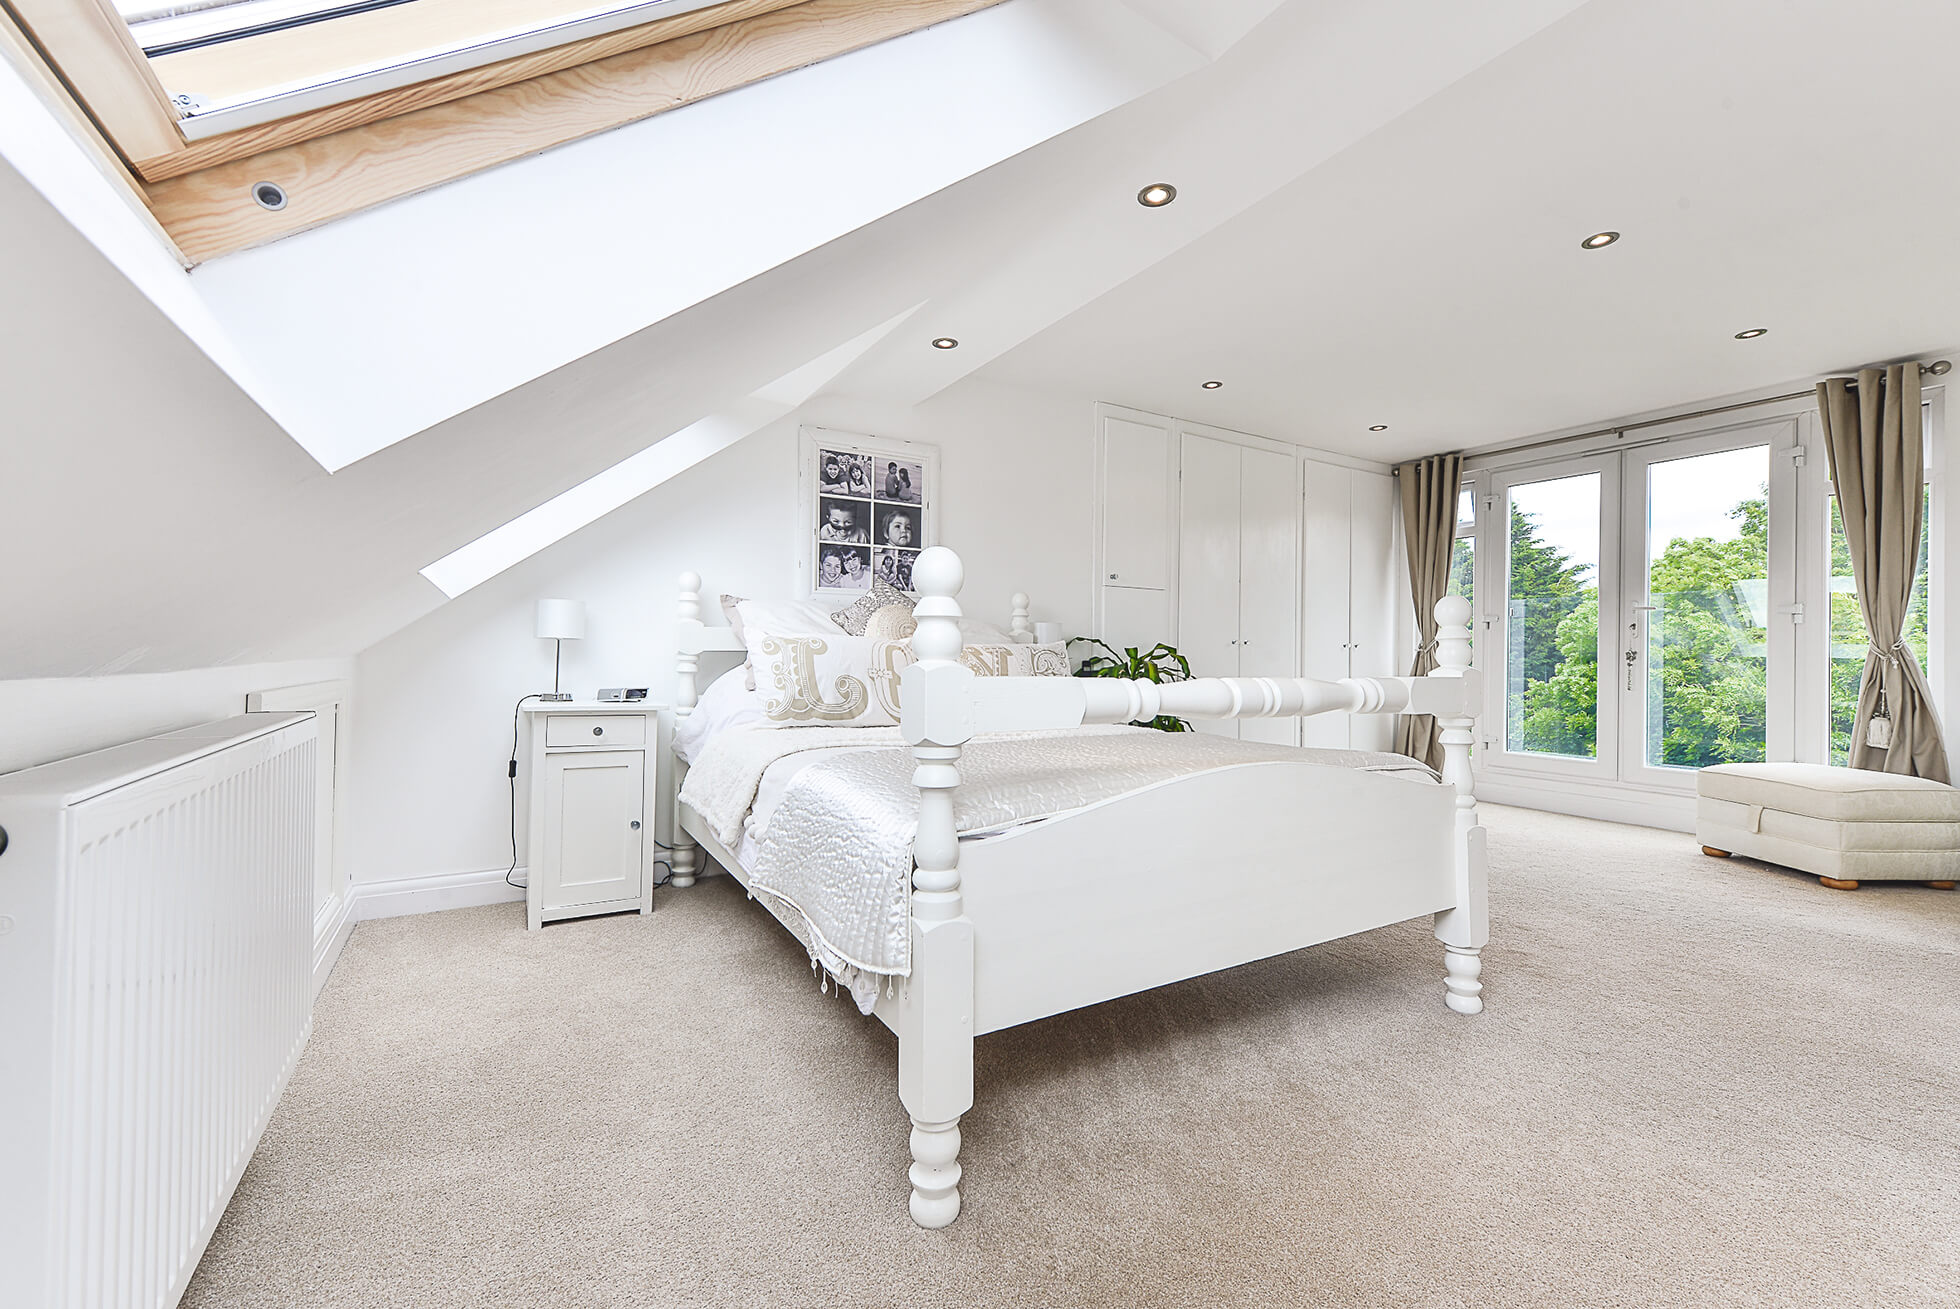 Do you have a question about converting your Loft in Cromer Hyde? Here are the most popular questions asked by our clients.